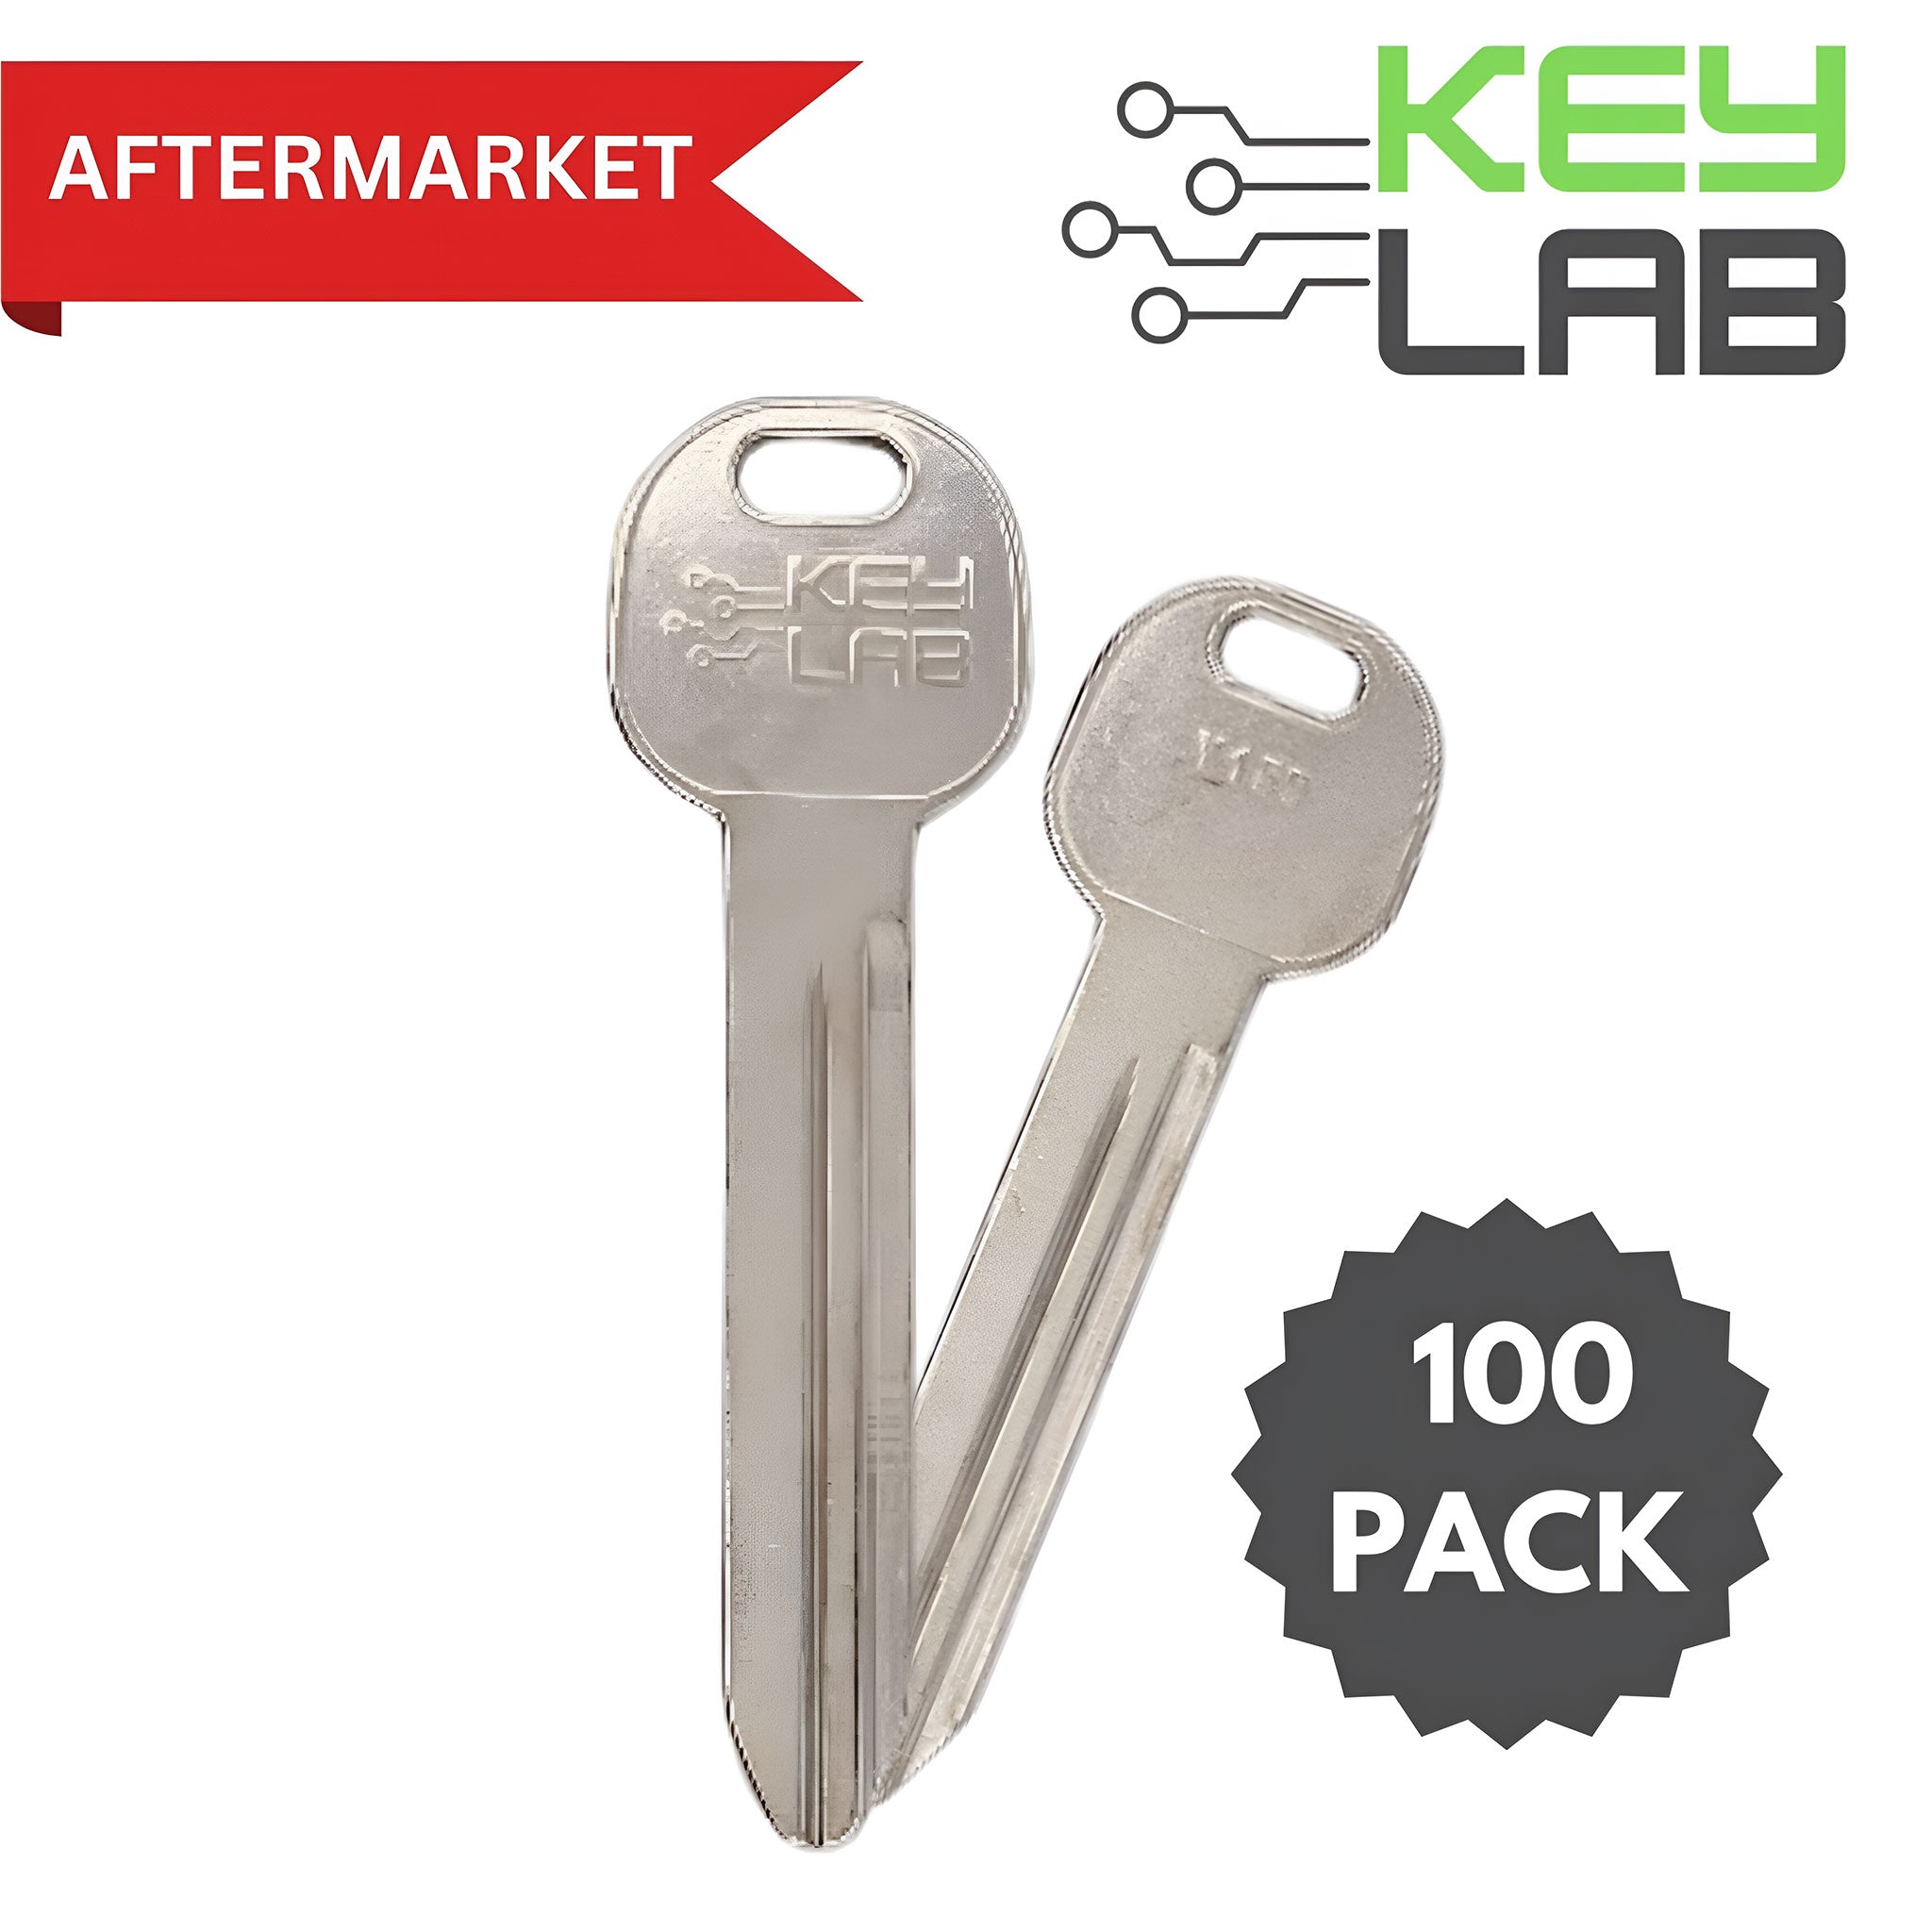 Dodge/Chrysler/Jeep Aftermarket 1994-2010 Durango, Cherokee, Town & Country Metal Key Y159 (Pack of 100) - Royal Key Supply